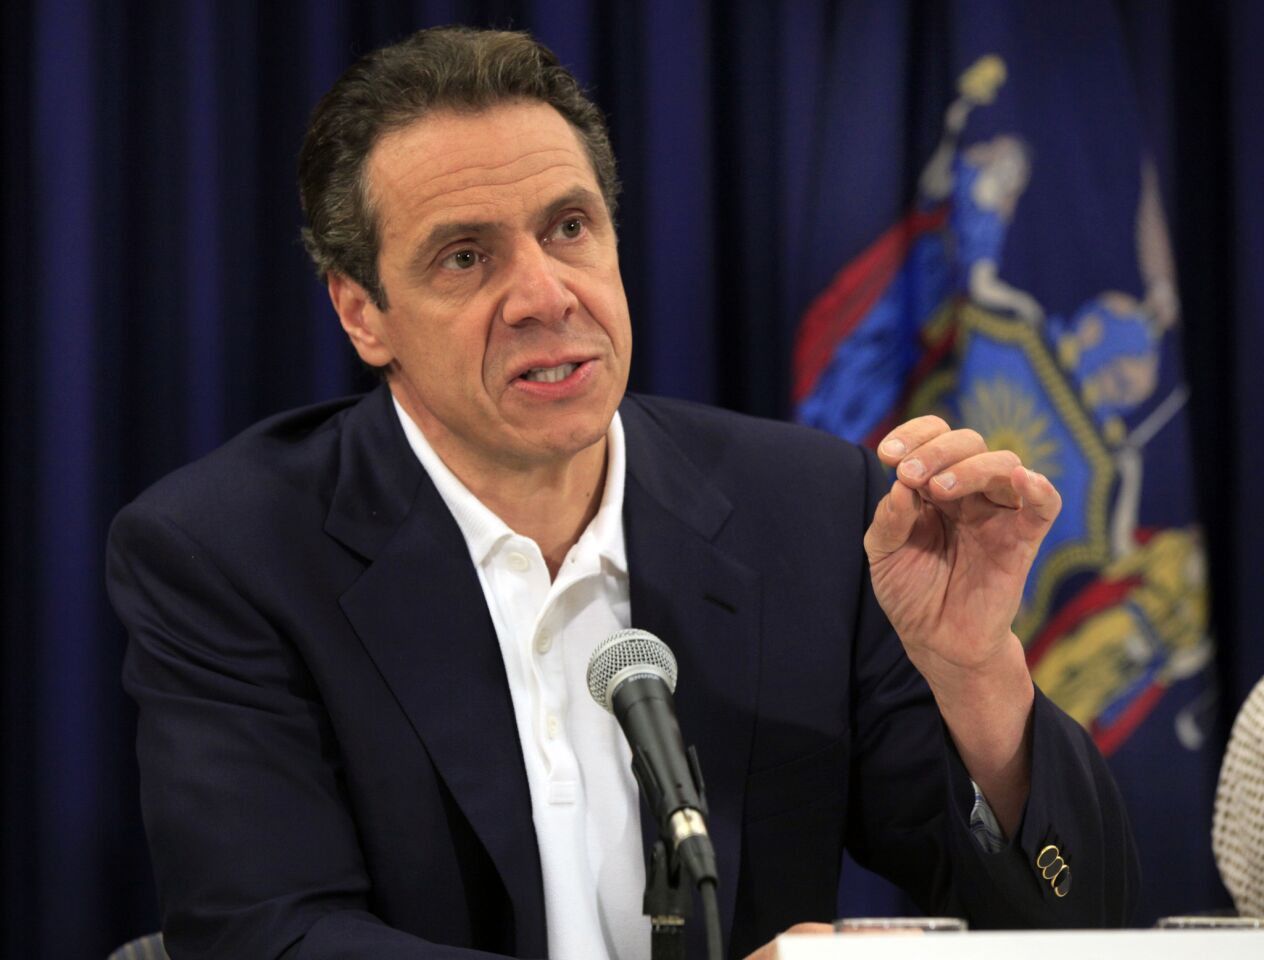 New York Gov. Andrew Cuomo is a more quiet figure on the national stage, but with solid approval ratings and proven success in fundraising, he remains part of the conversation.